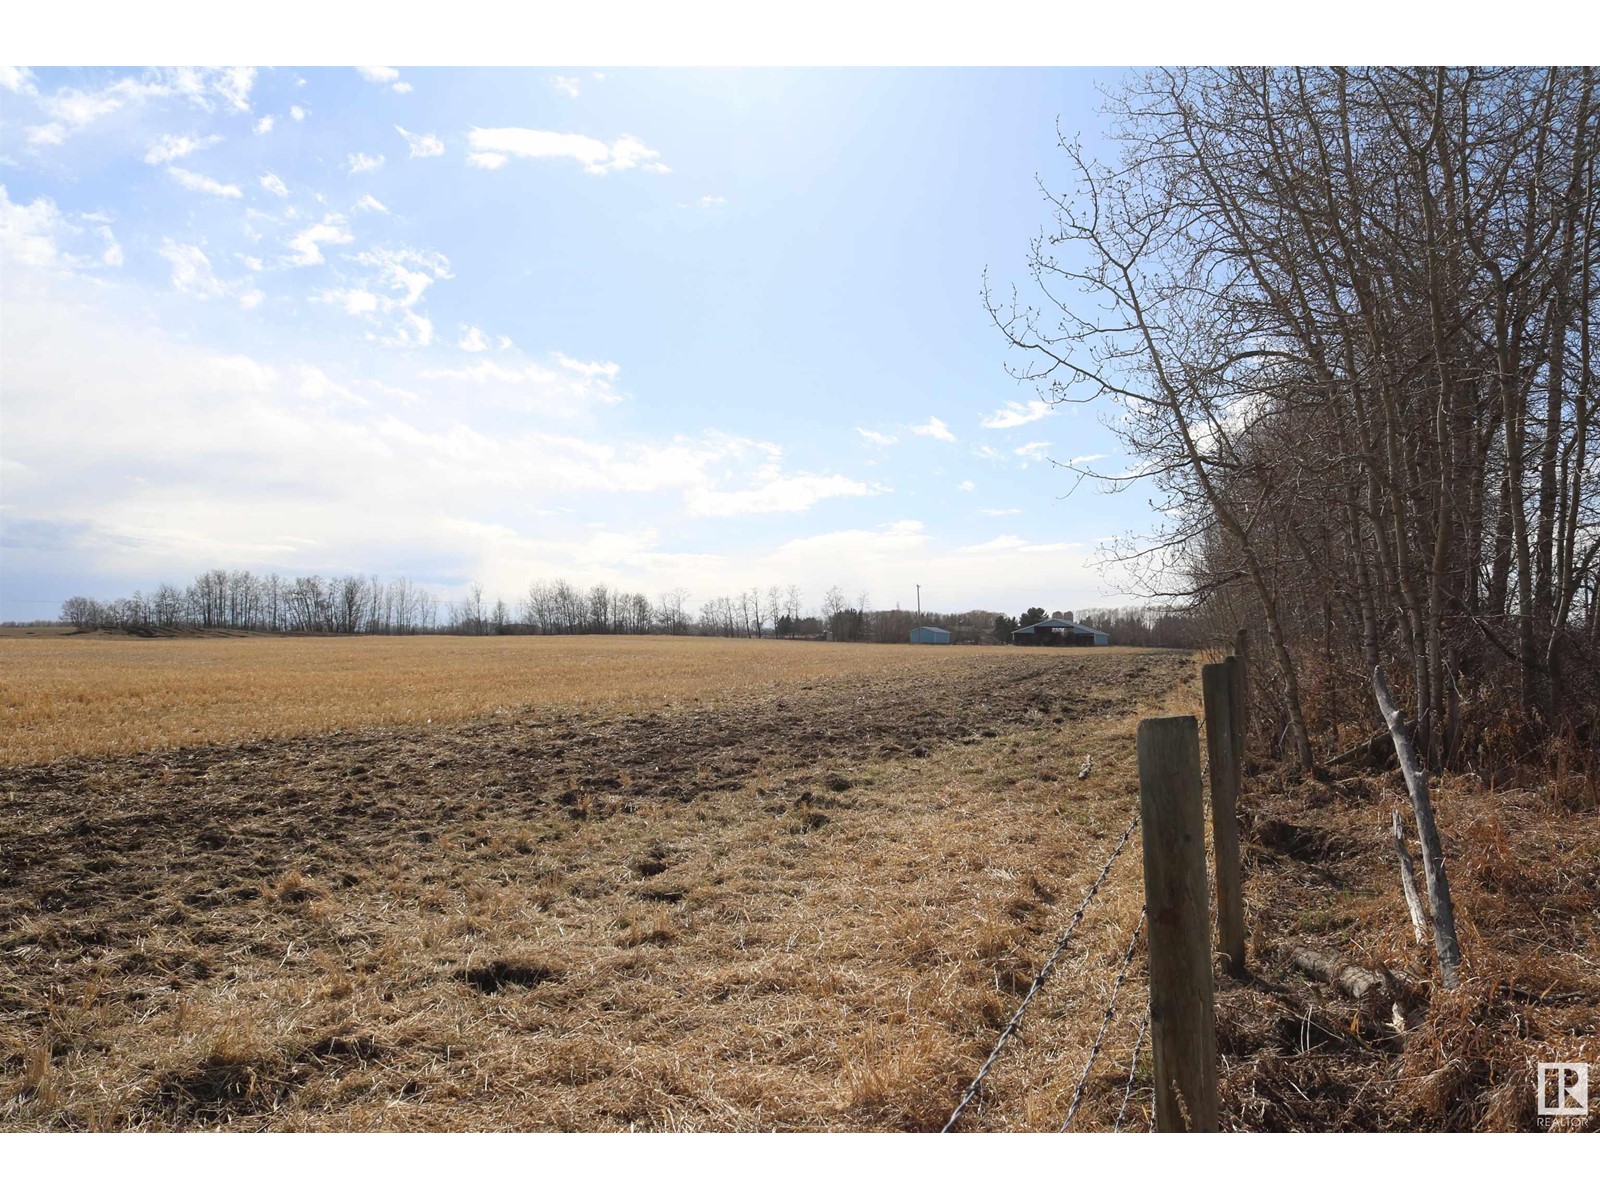 27131 Twp Rd 513, Rural Parkland County, Alberta  T7Y 1H1 - Photo 3 - E4384049